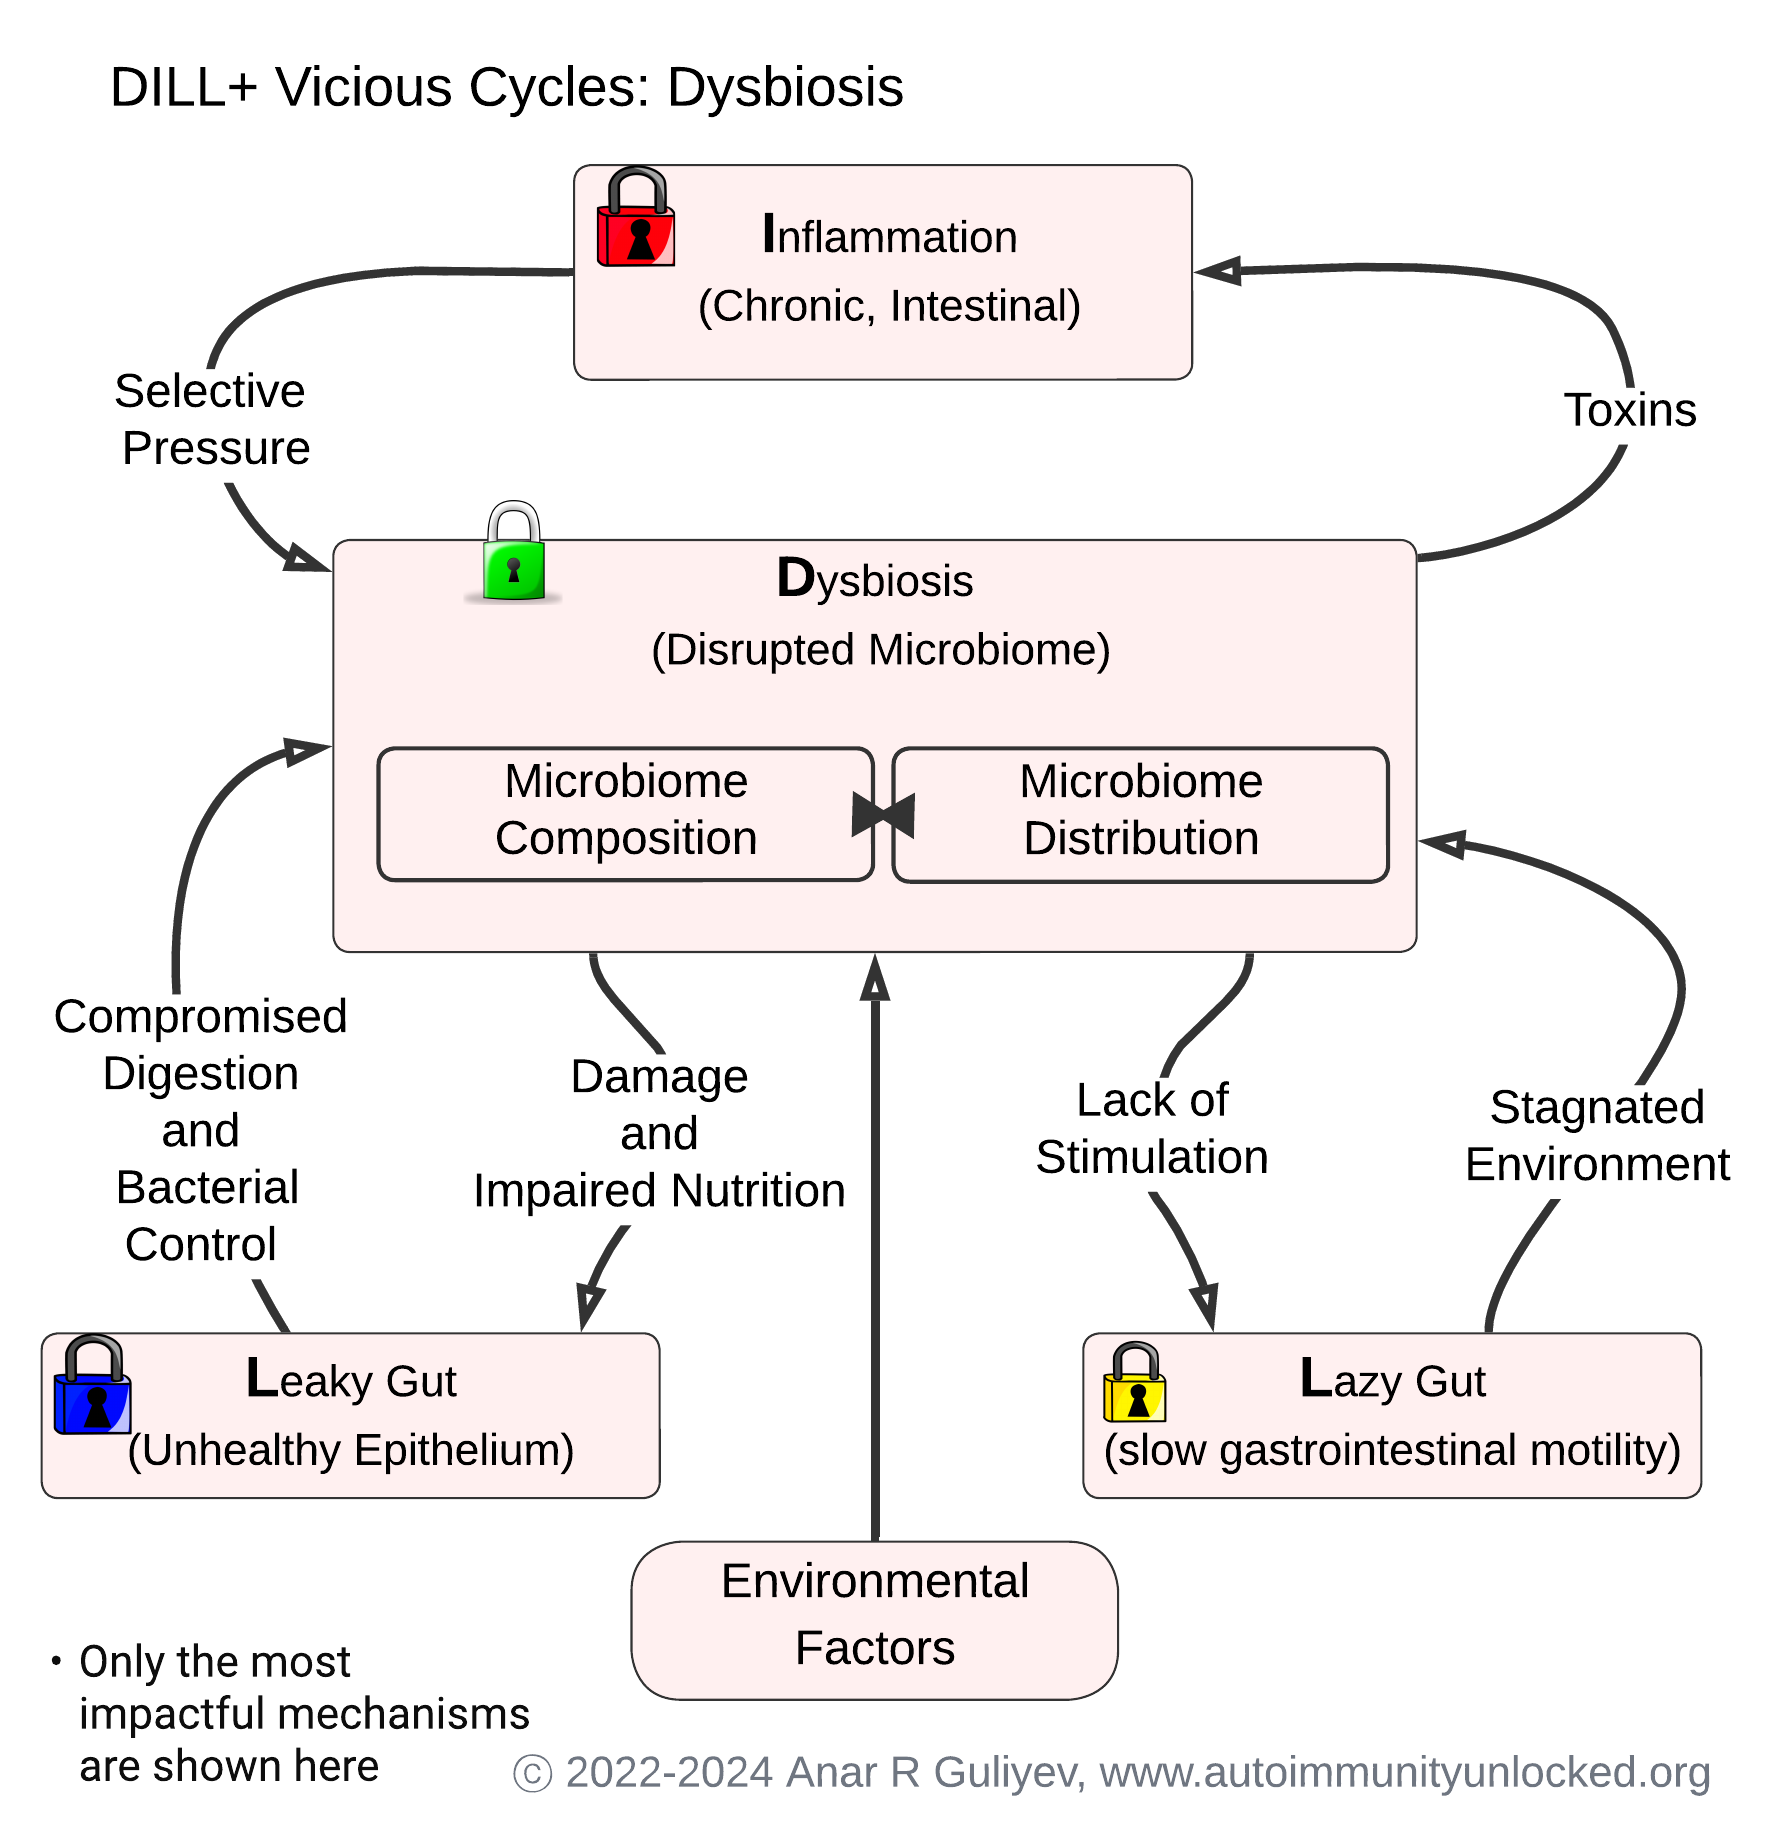 DILL+ Vicious Cycles: Dysbiosis